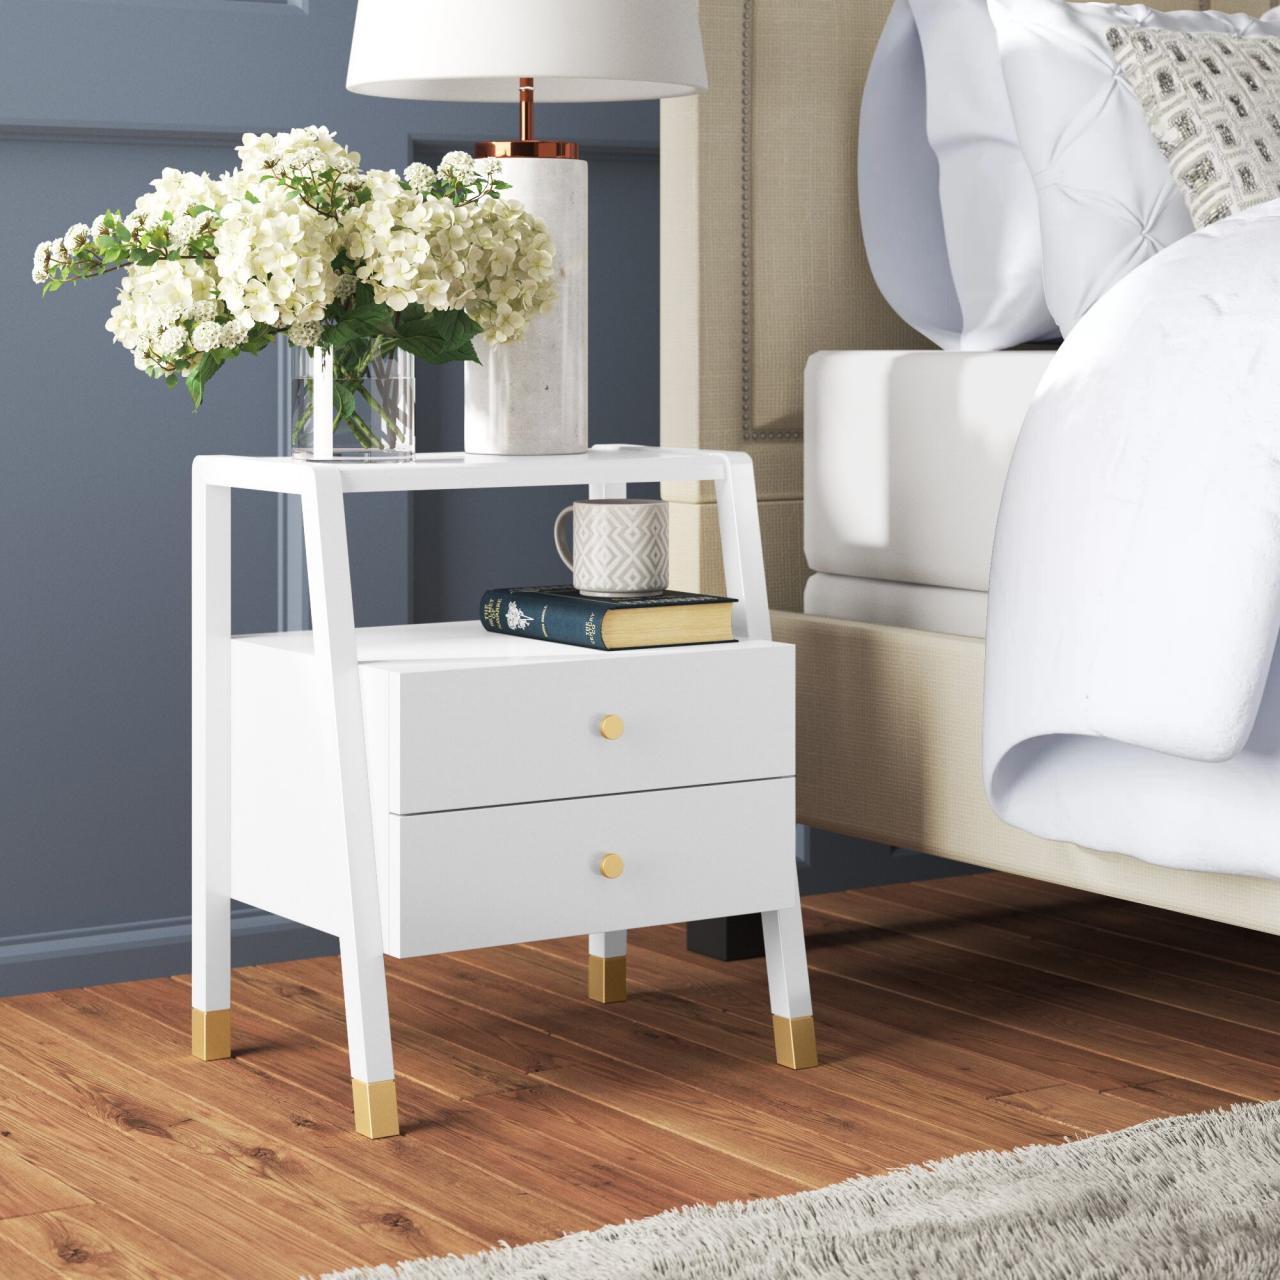 https://hgtvhome.sndimg.com/content/dam/images/hgtv/products/2022/1/21/rx_wayfair_swaney-solid-wood-side-table.jpeg.rend.hgtvcom.1280.1280.suffix/1642801284025.jpeg